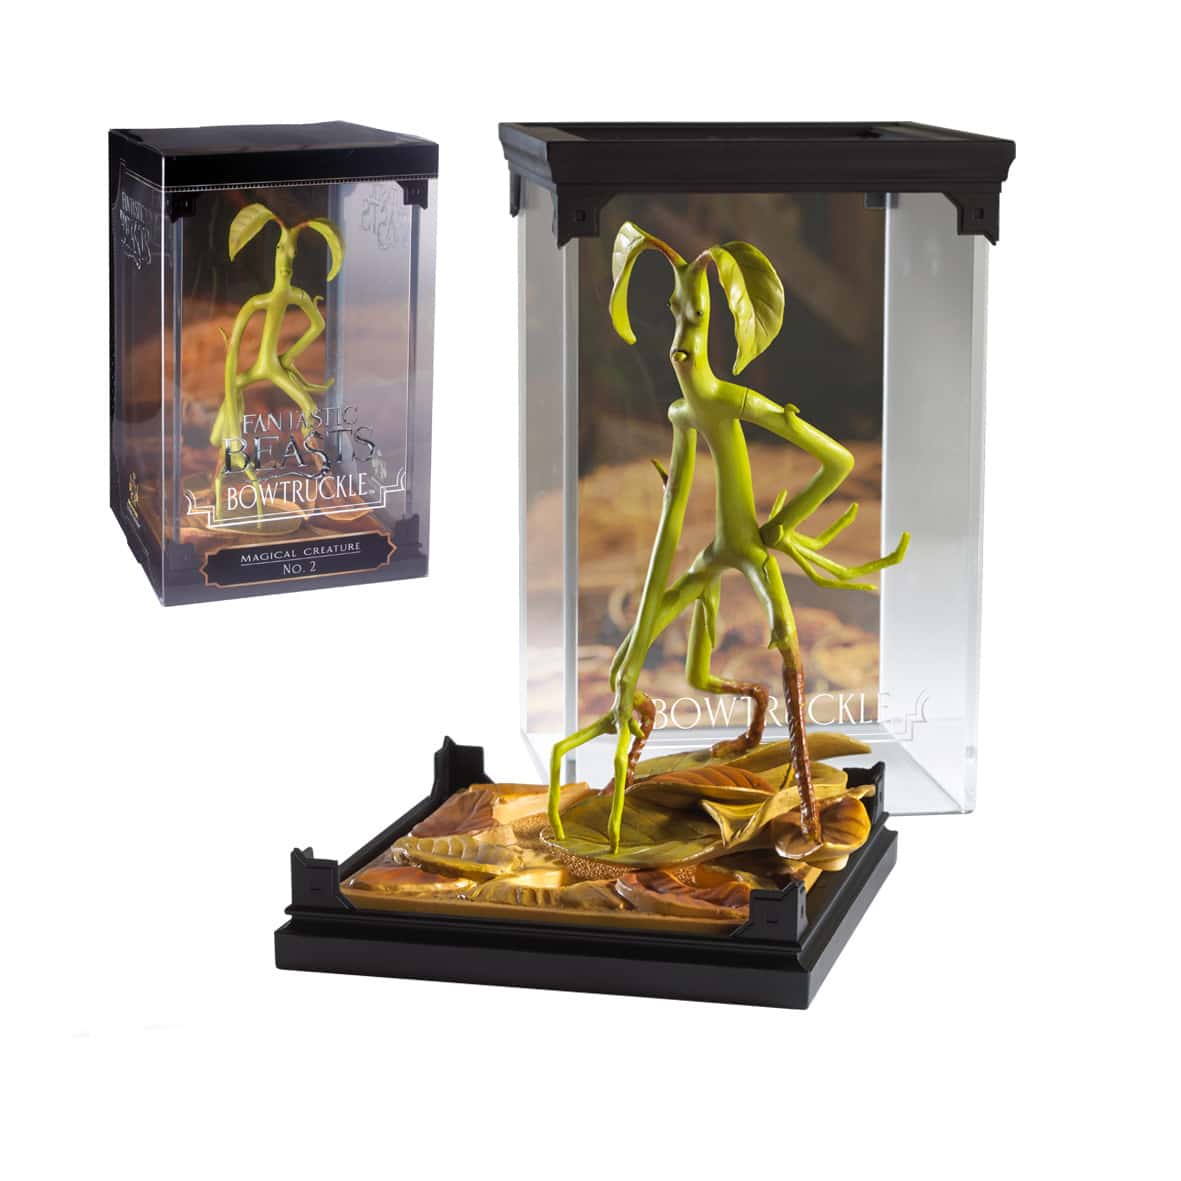 BOWTRUCKLE CRIATURA MAGICA 2 FIGURA FANTASTIC BEASTS AND WHERE TO FIND THEM